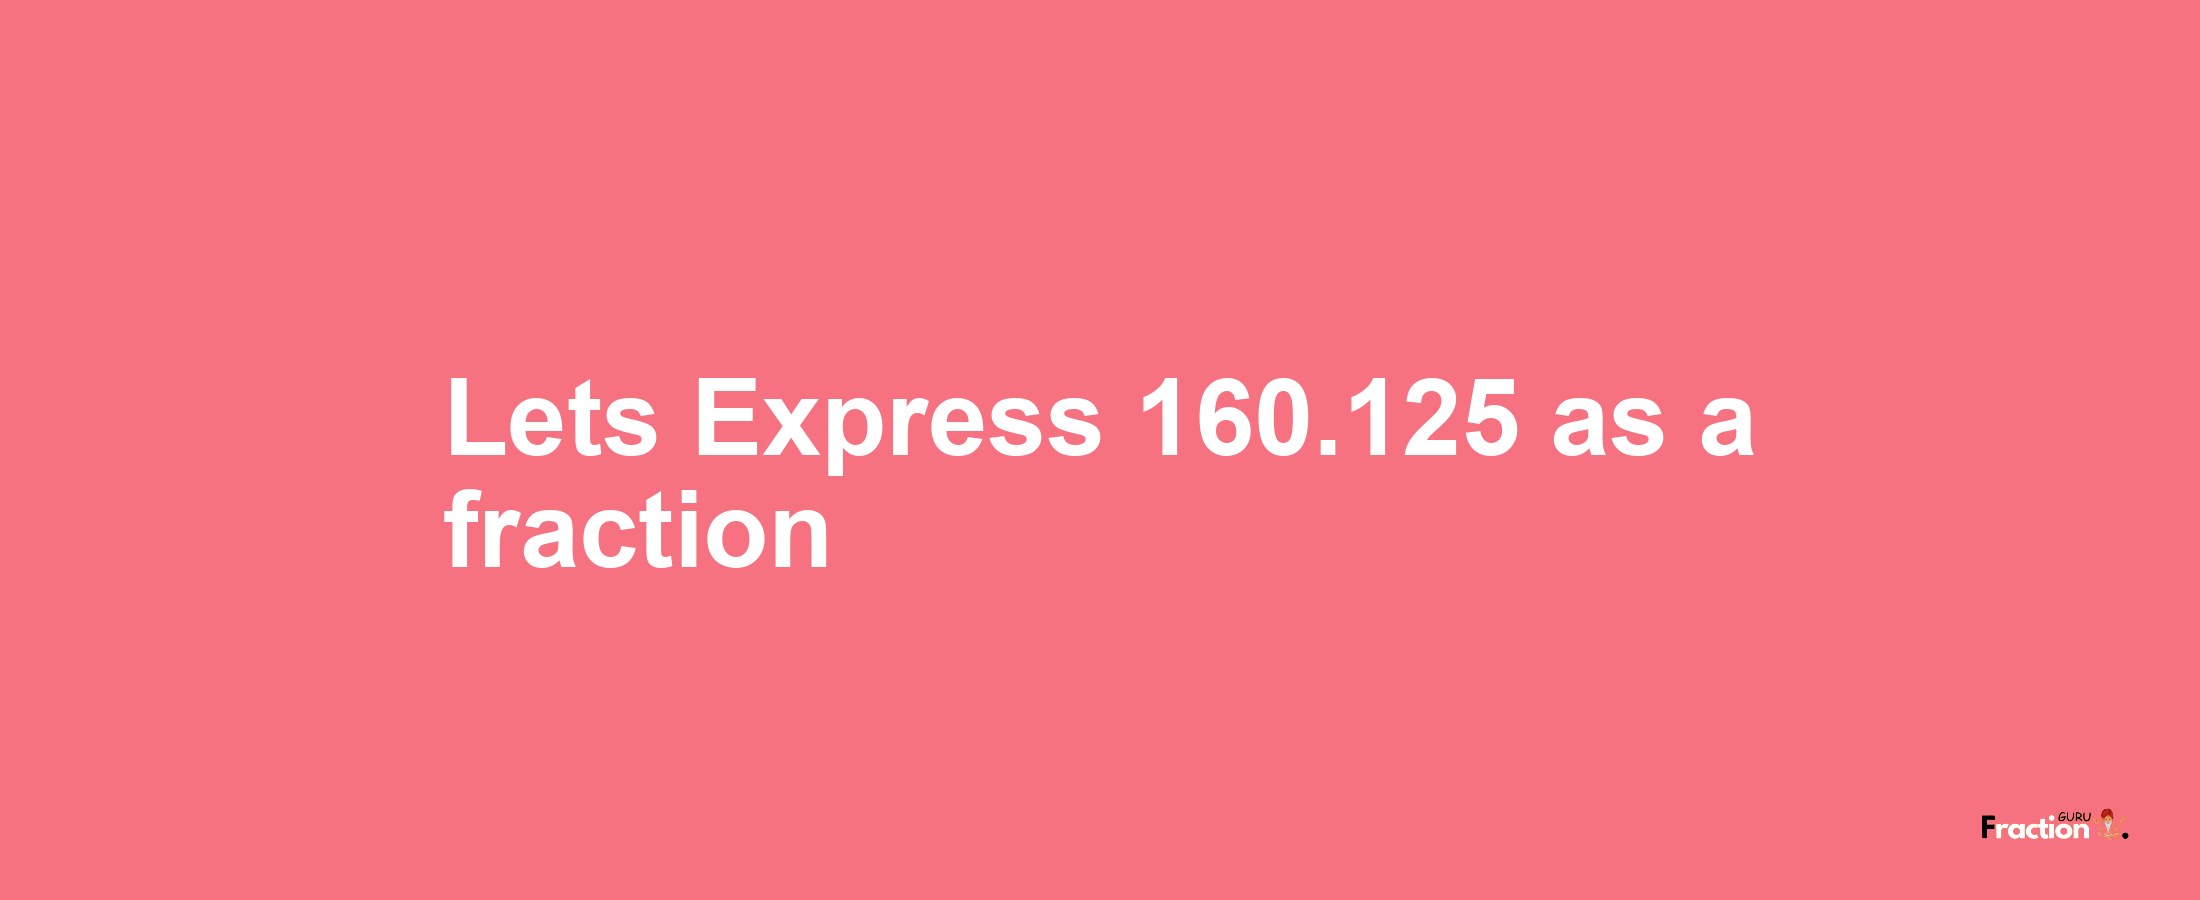 Lets Express 160.125 as afraction